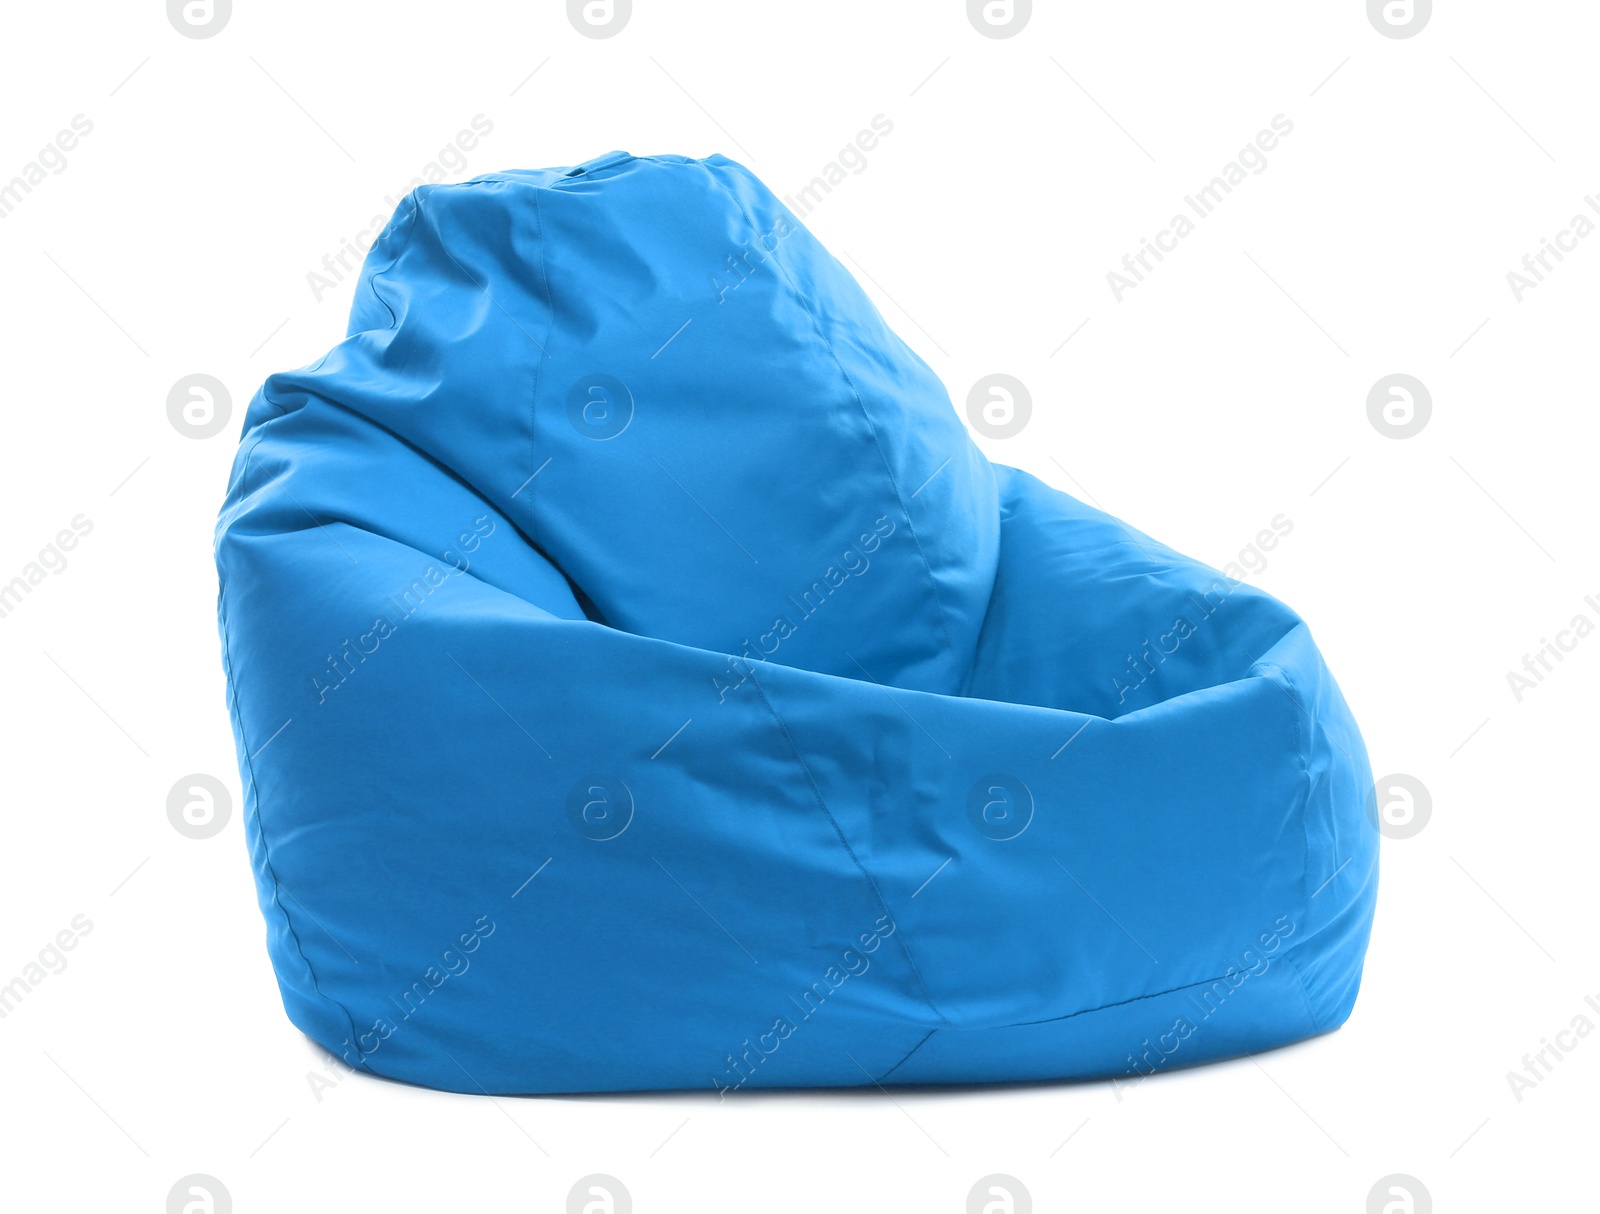 Image of One light blue bean bag chair isolated on white